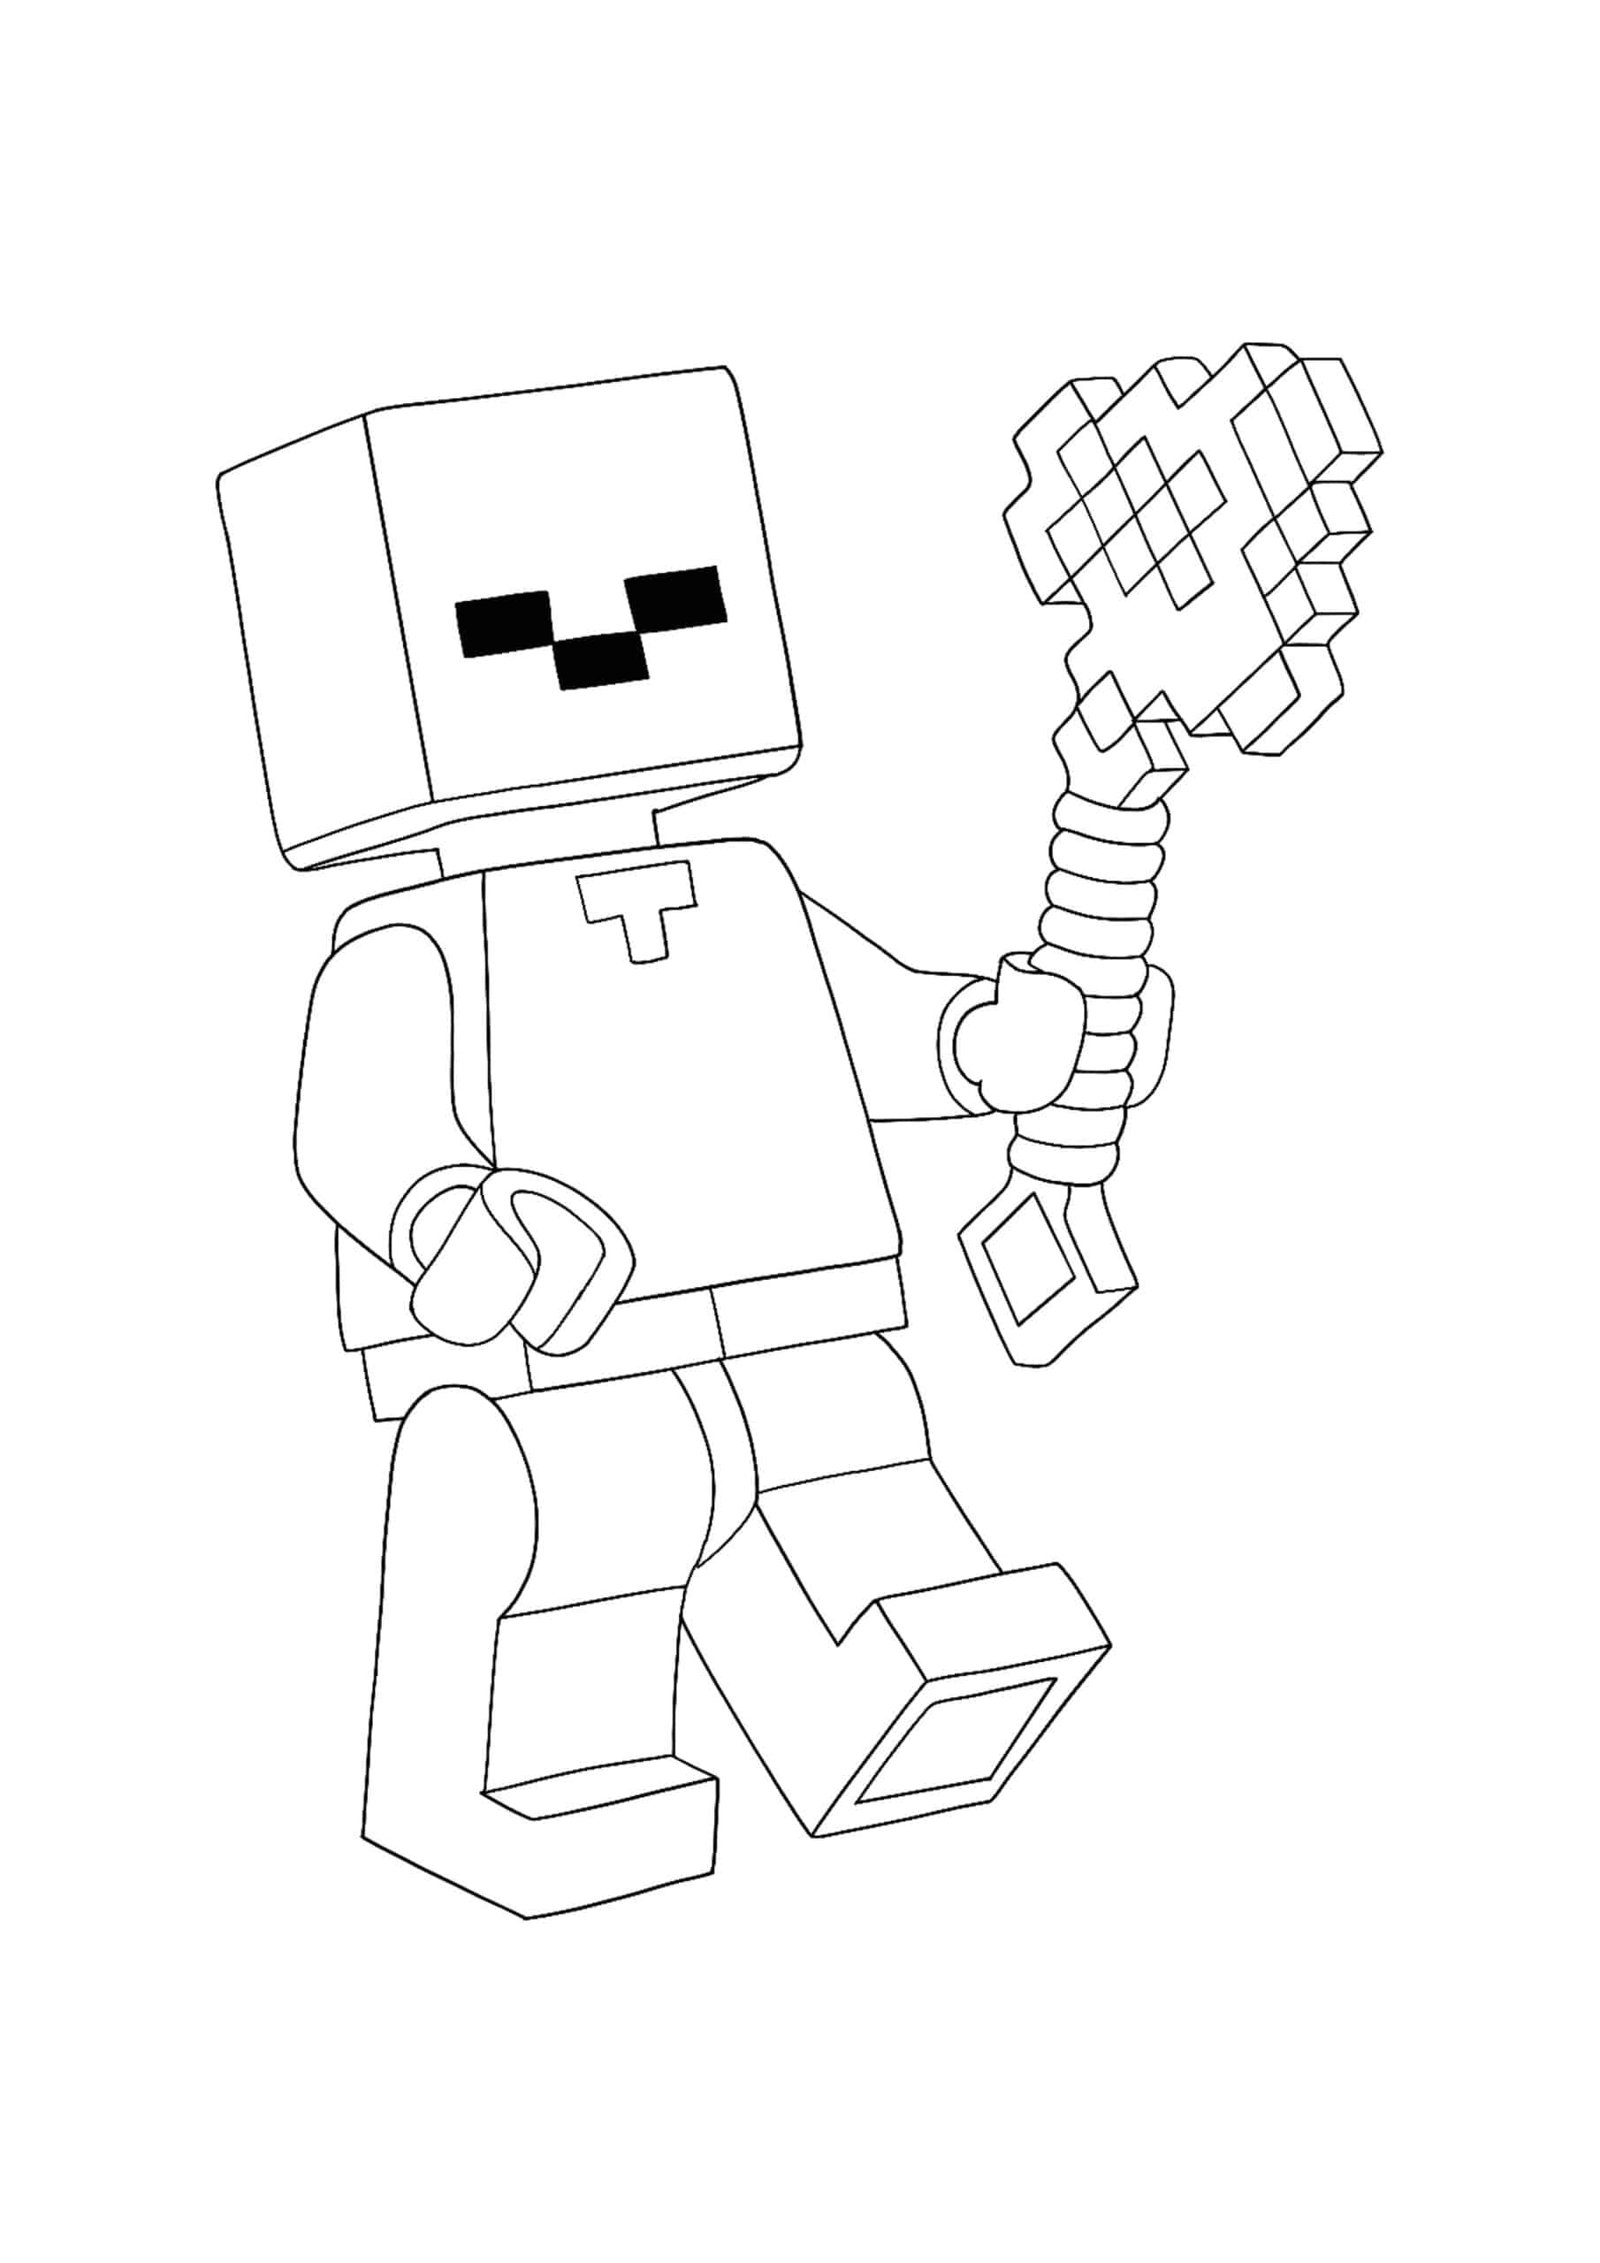 Minecraft Lego Zombie coloring page